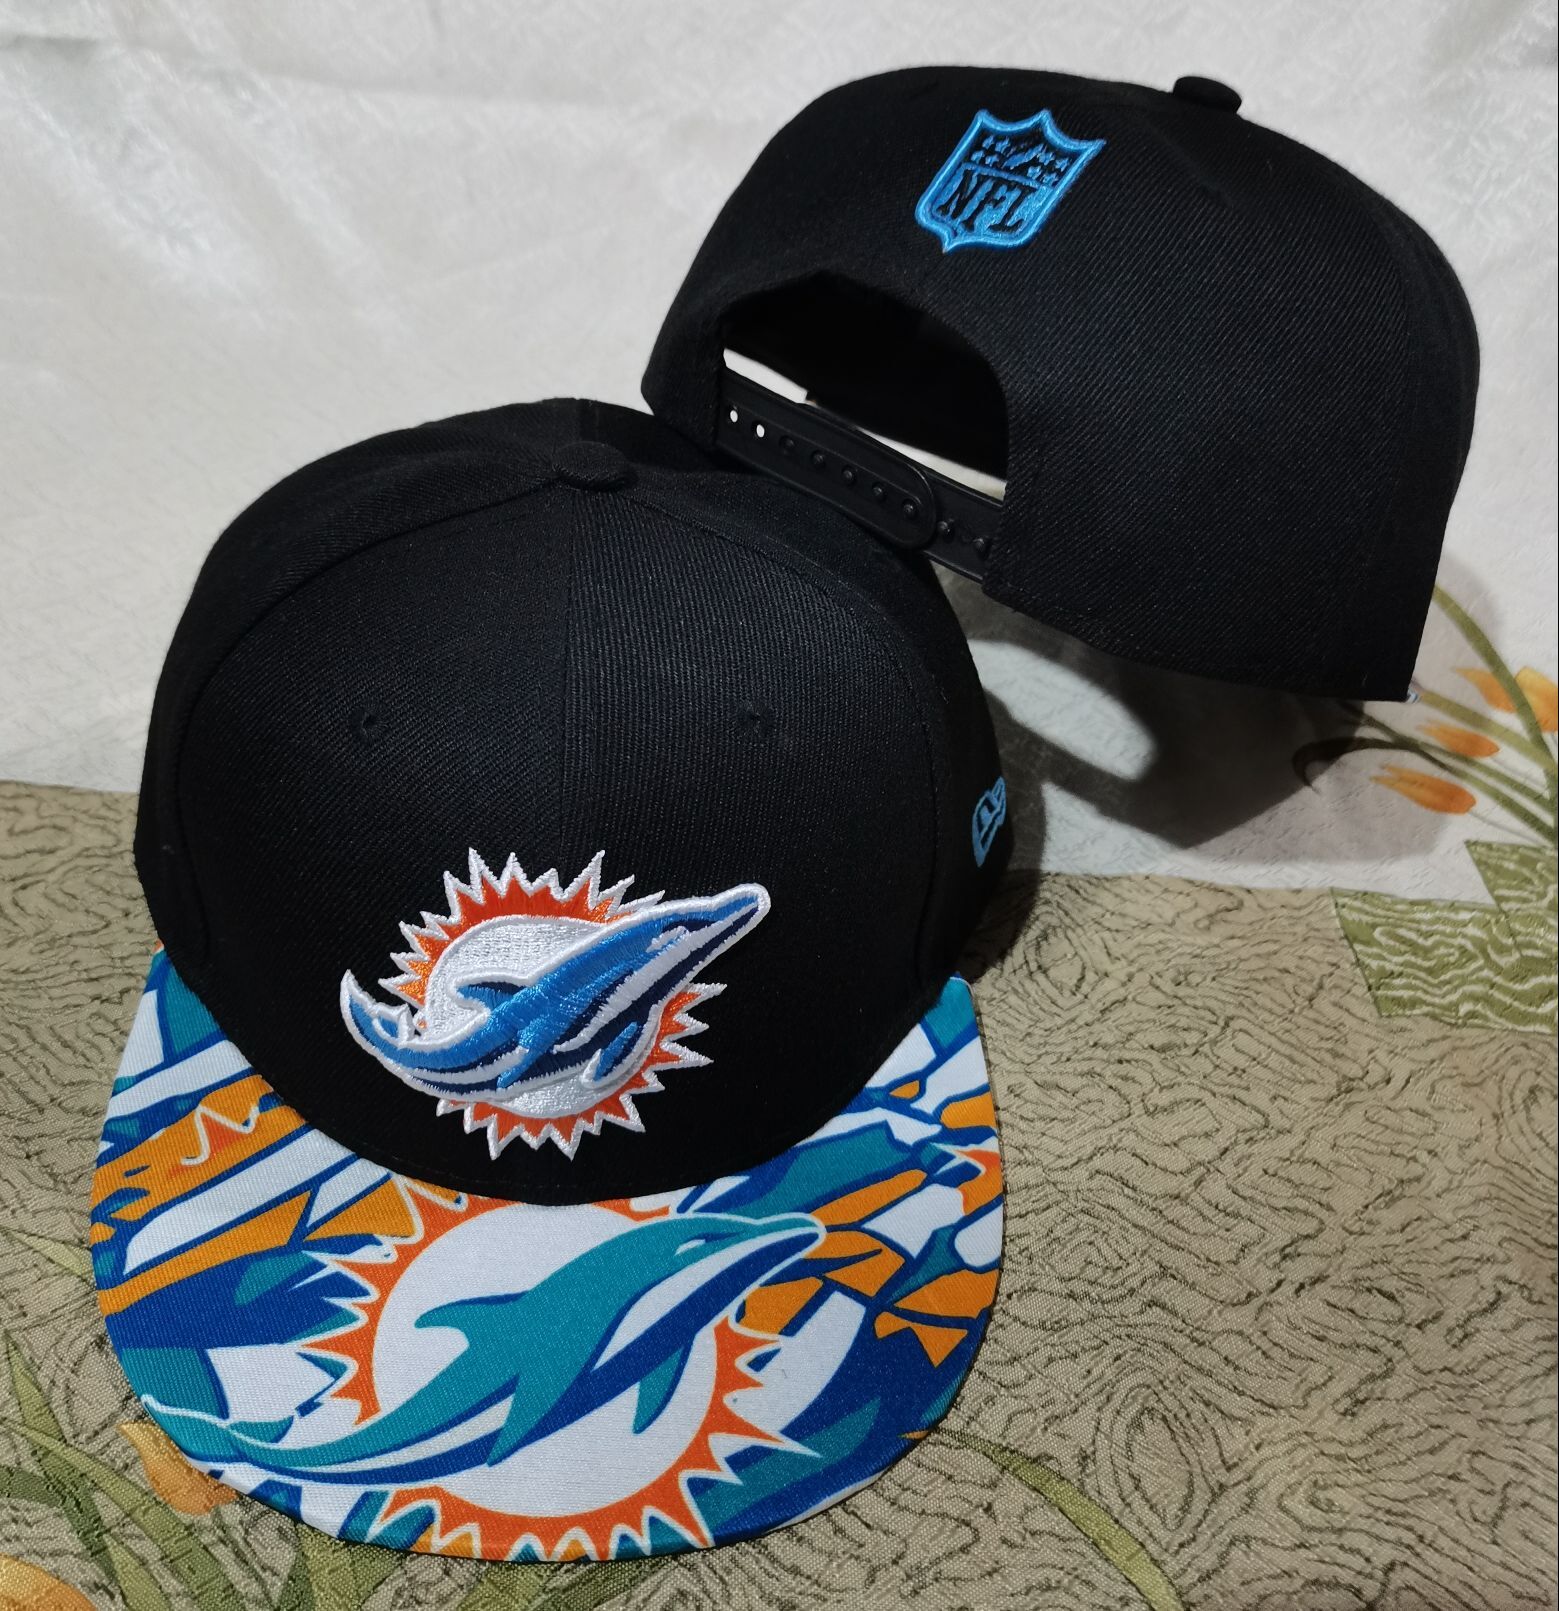 2022 NFL Miami Dolphins hat GSMY->nfl hats->Sports Caps